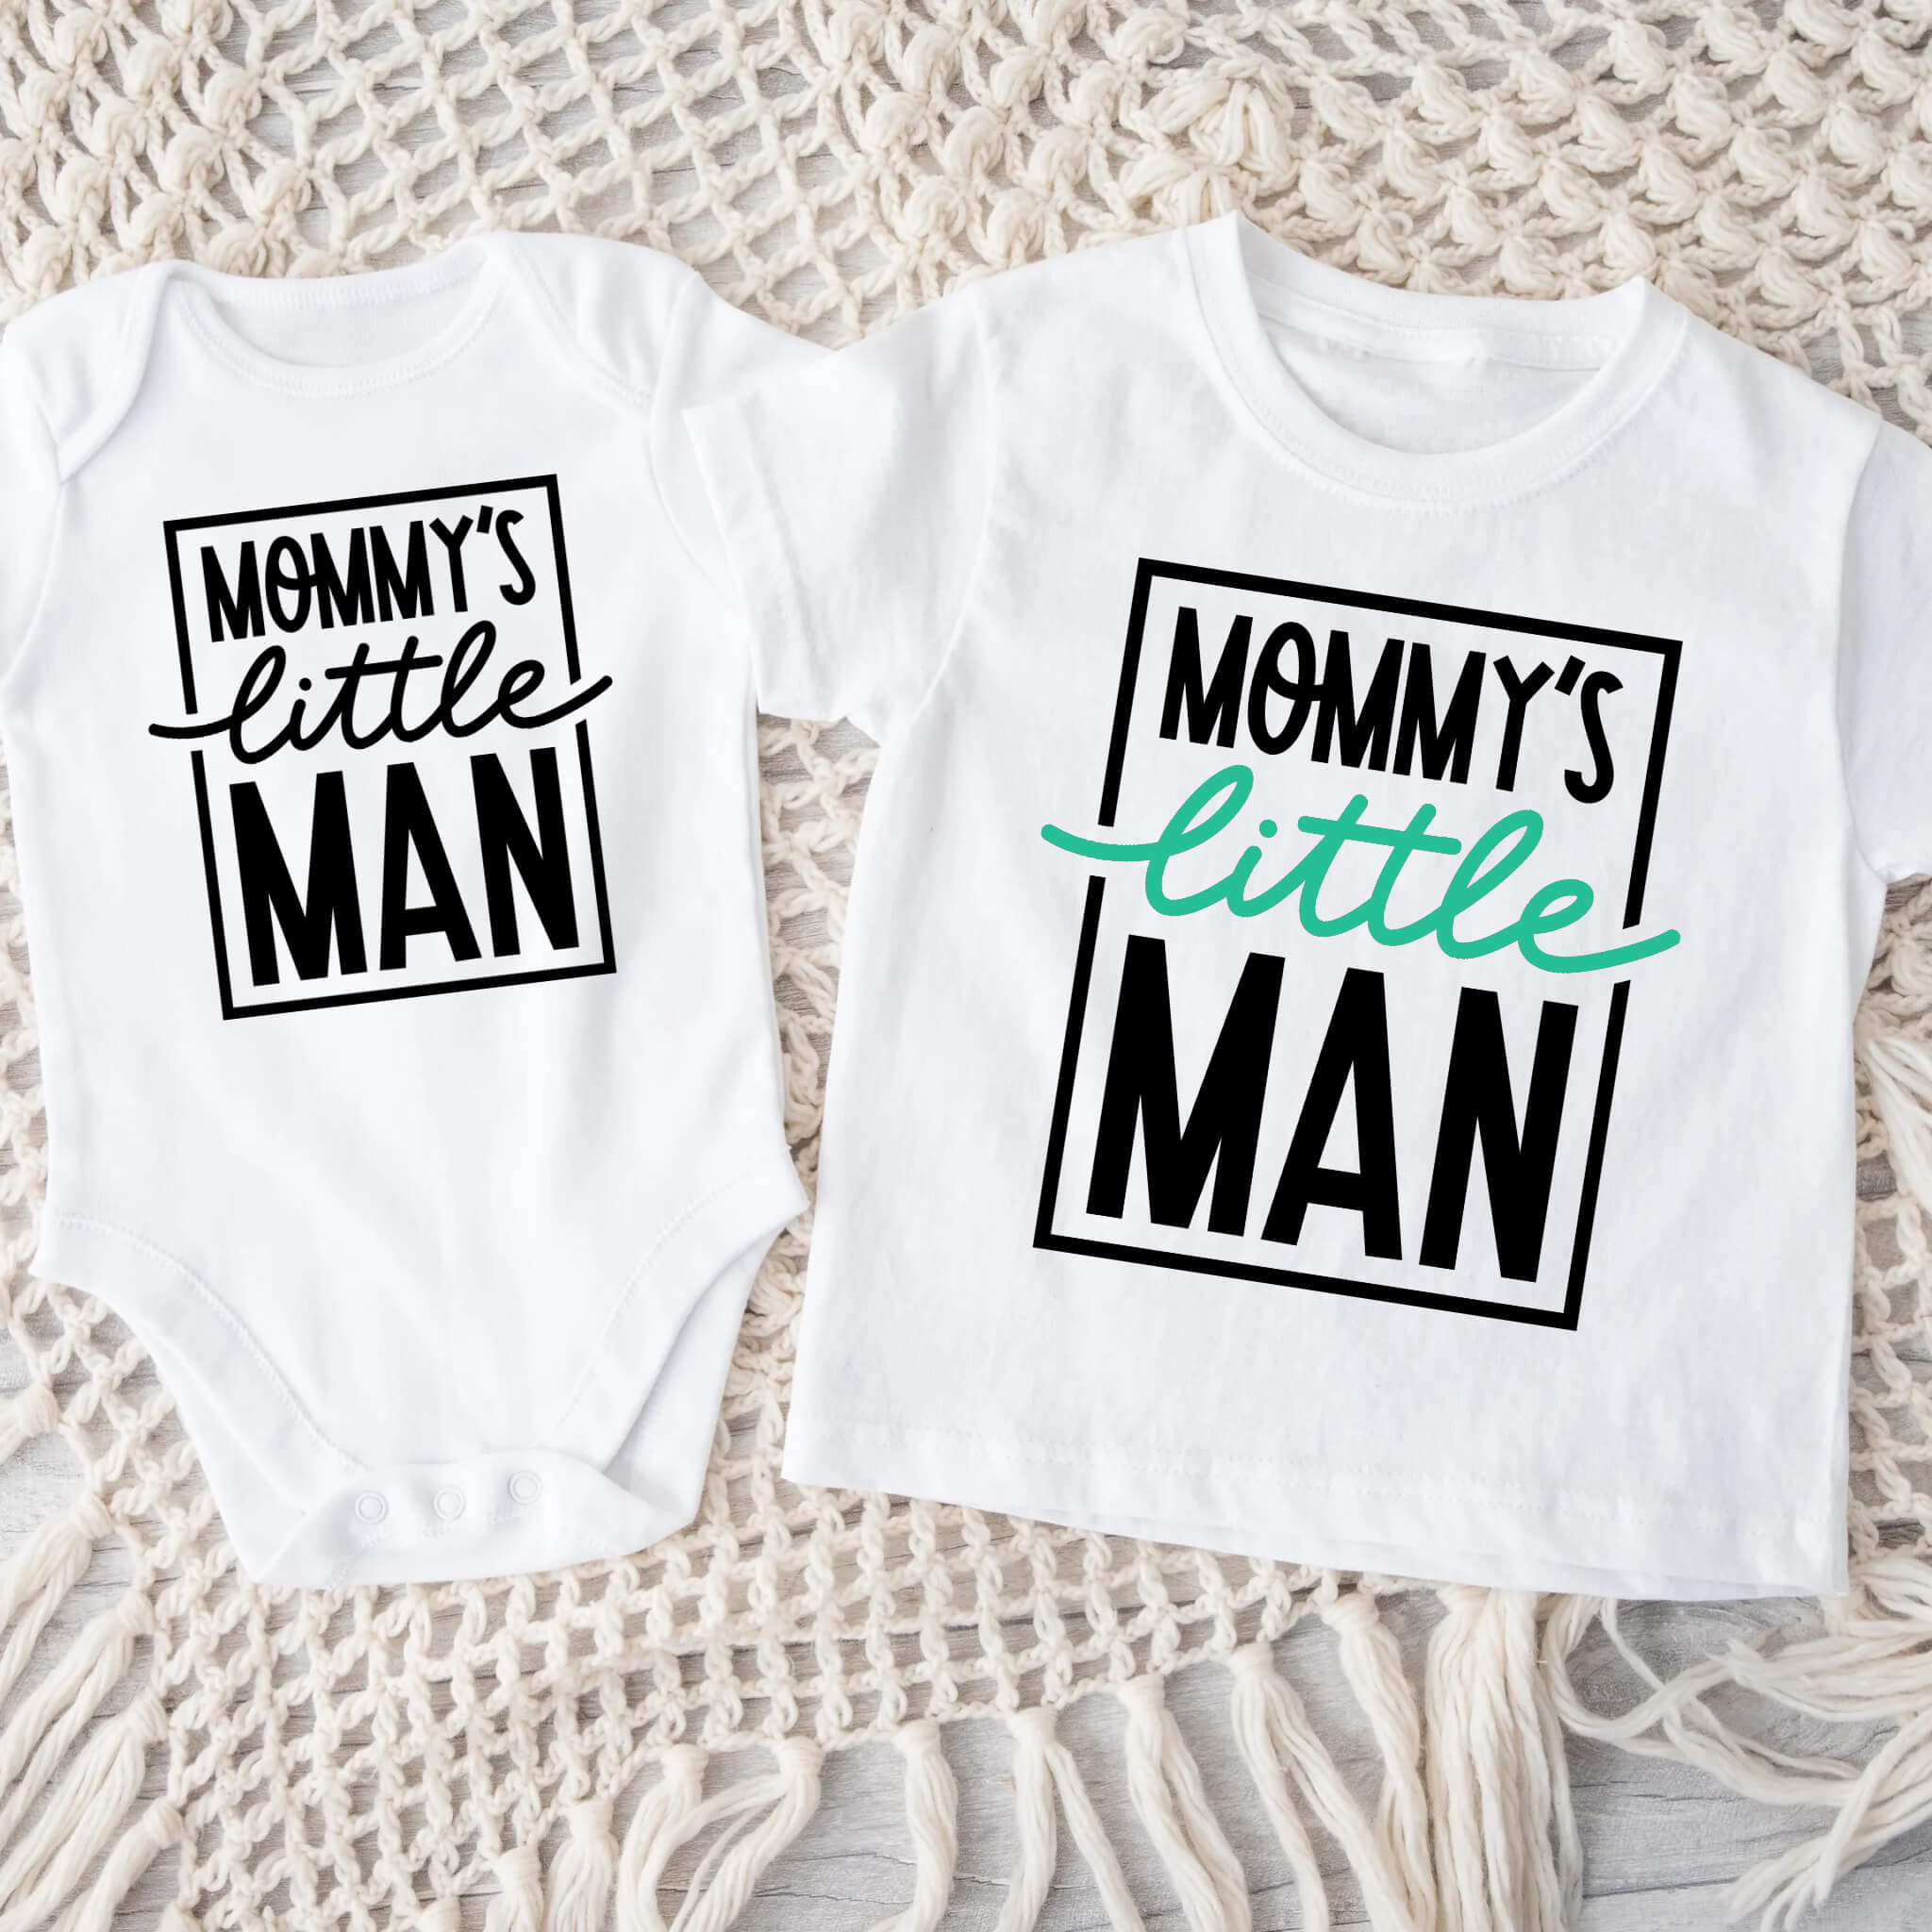 Mommy's Little Man Onesie or T-Shirts